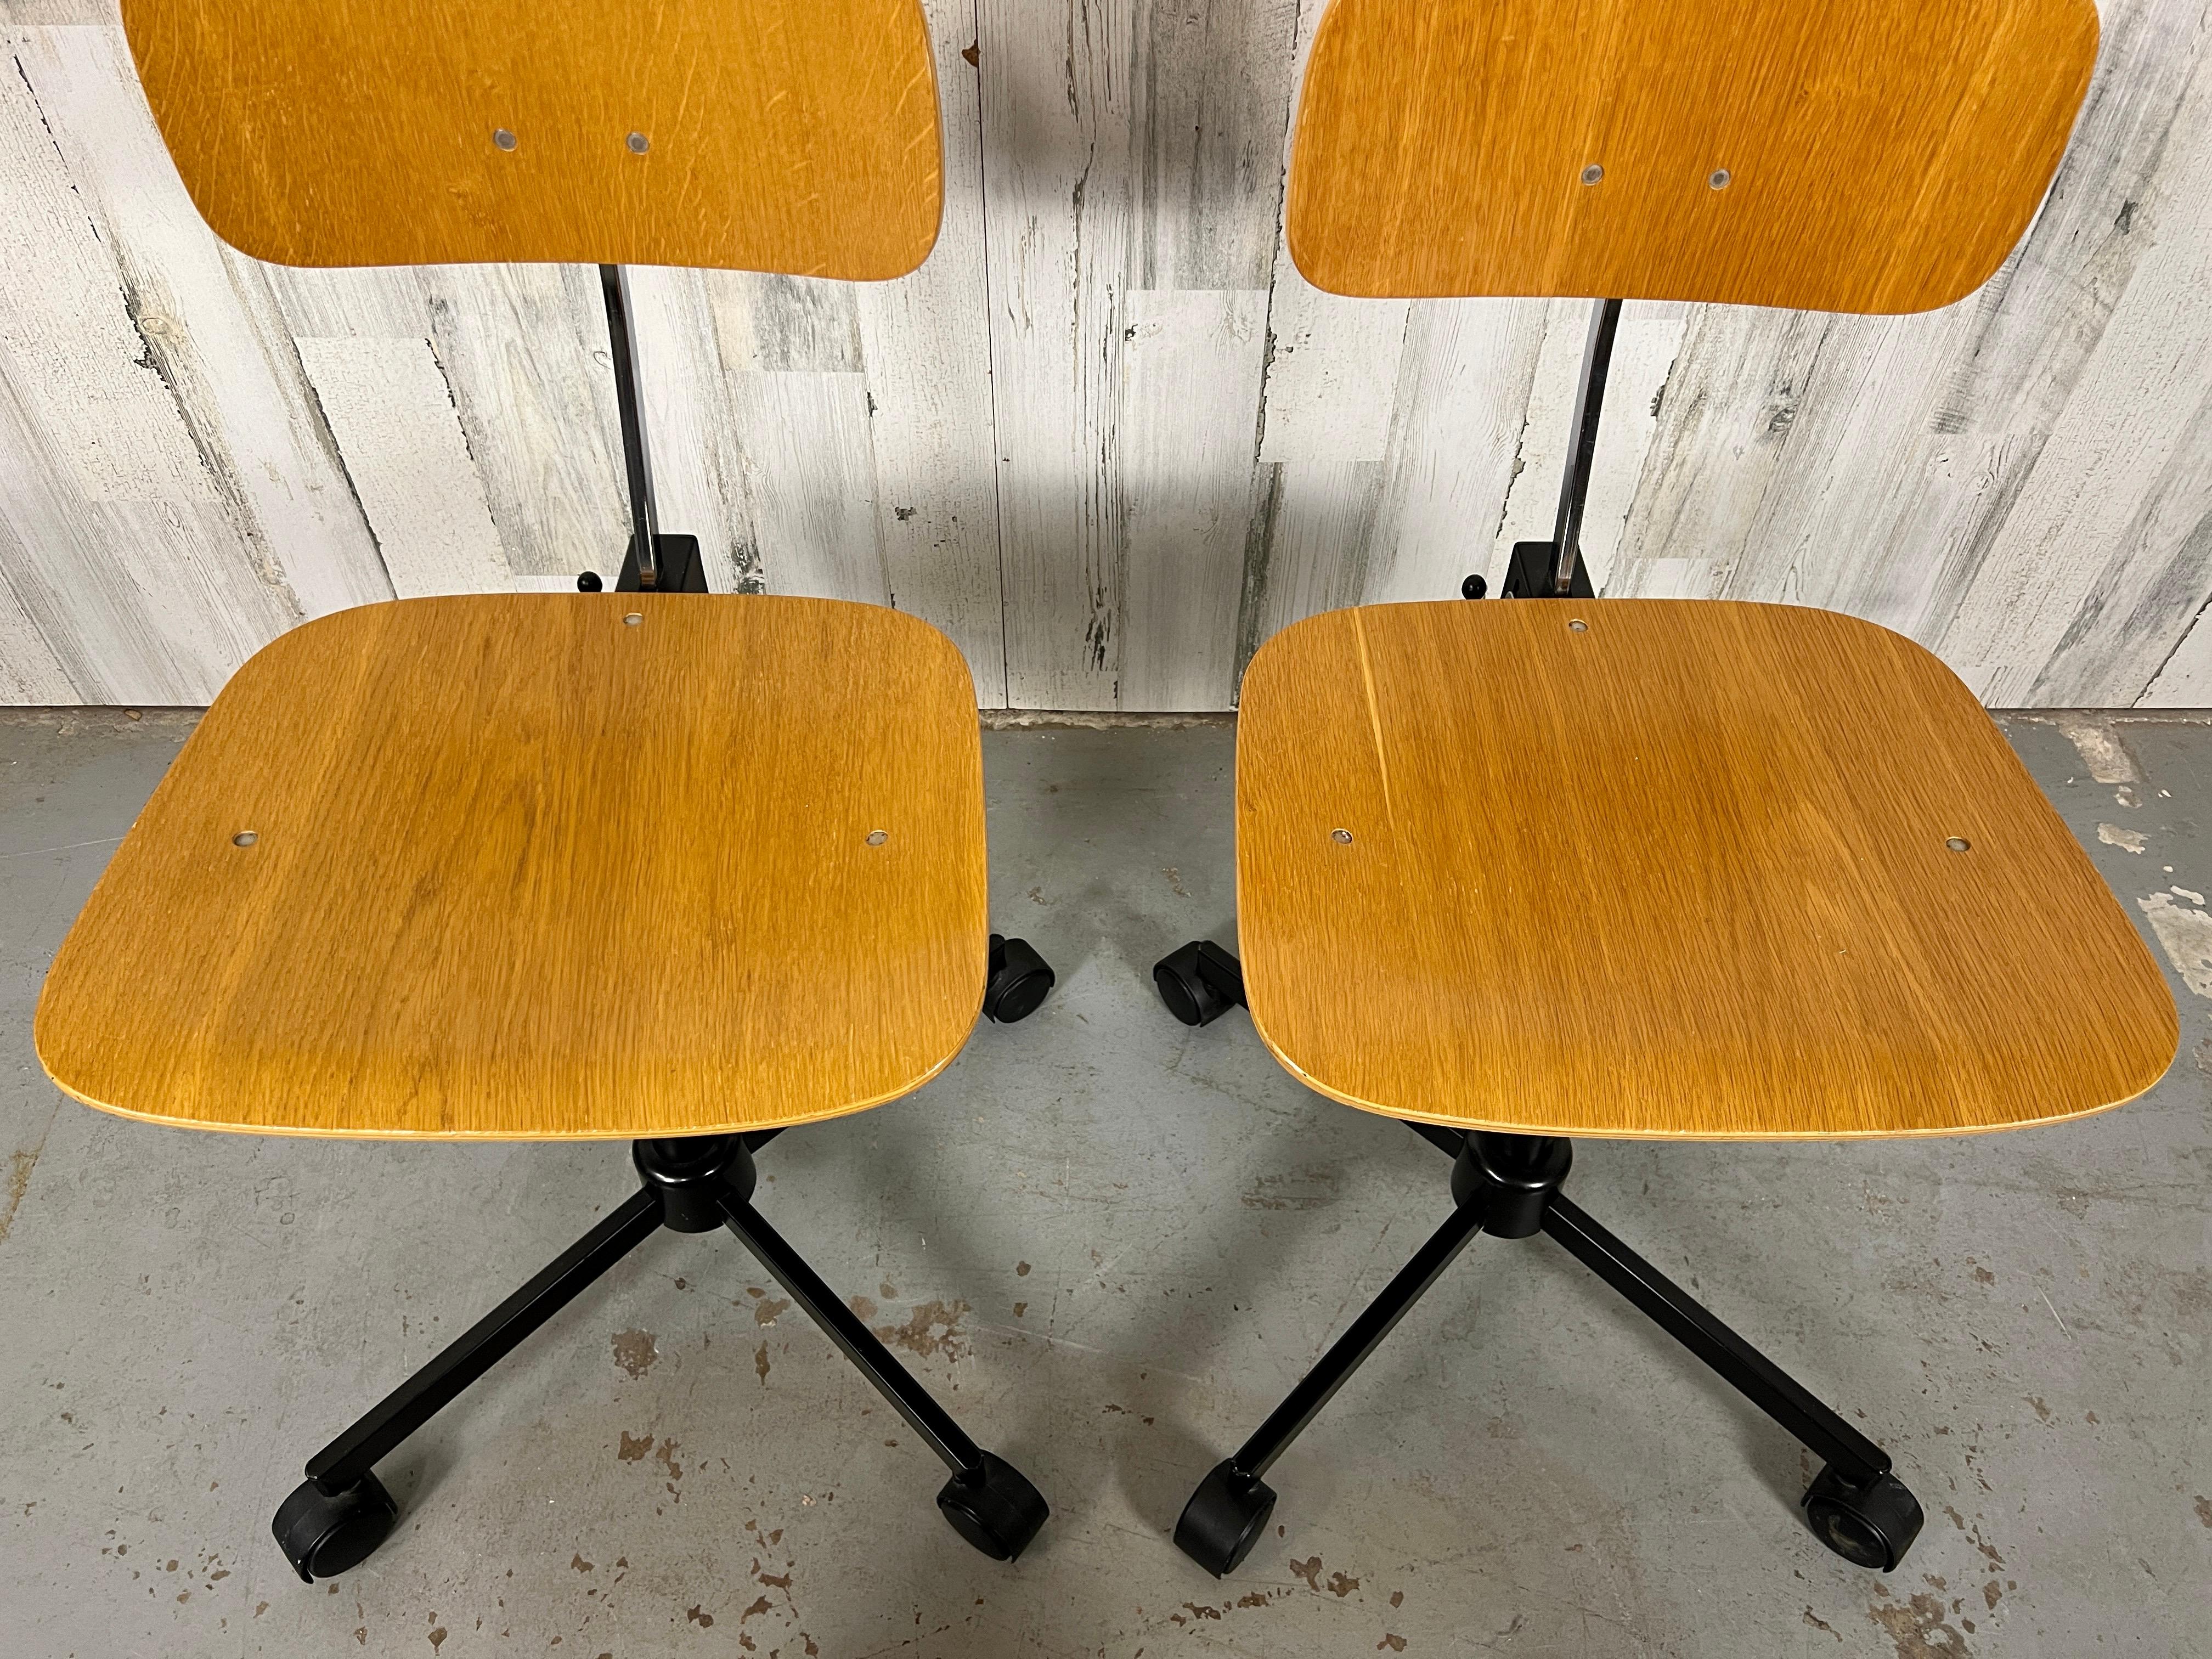 Pair of Rabami Danish Teak Kevi Desk Chairs In Good Condition For Sale In Denton, TX